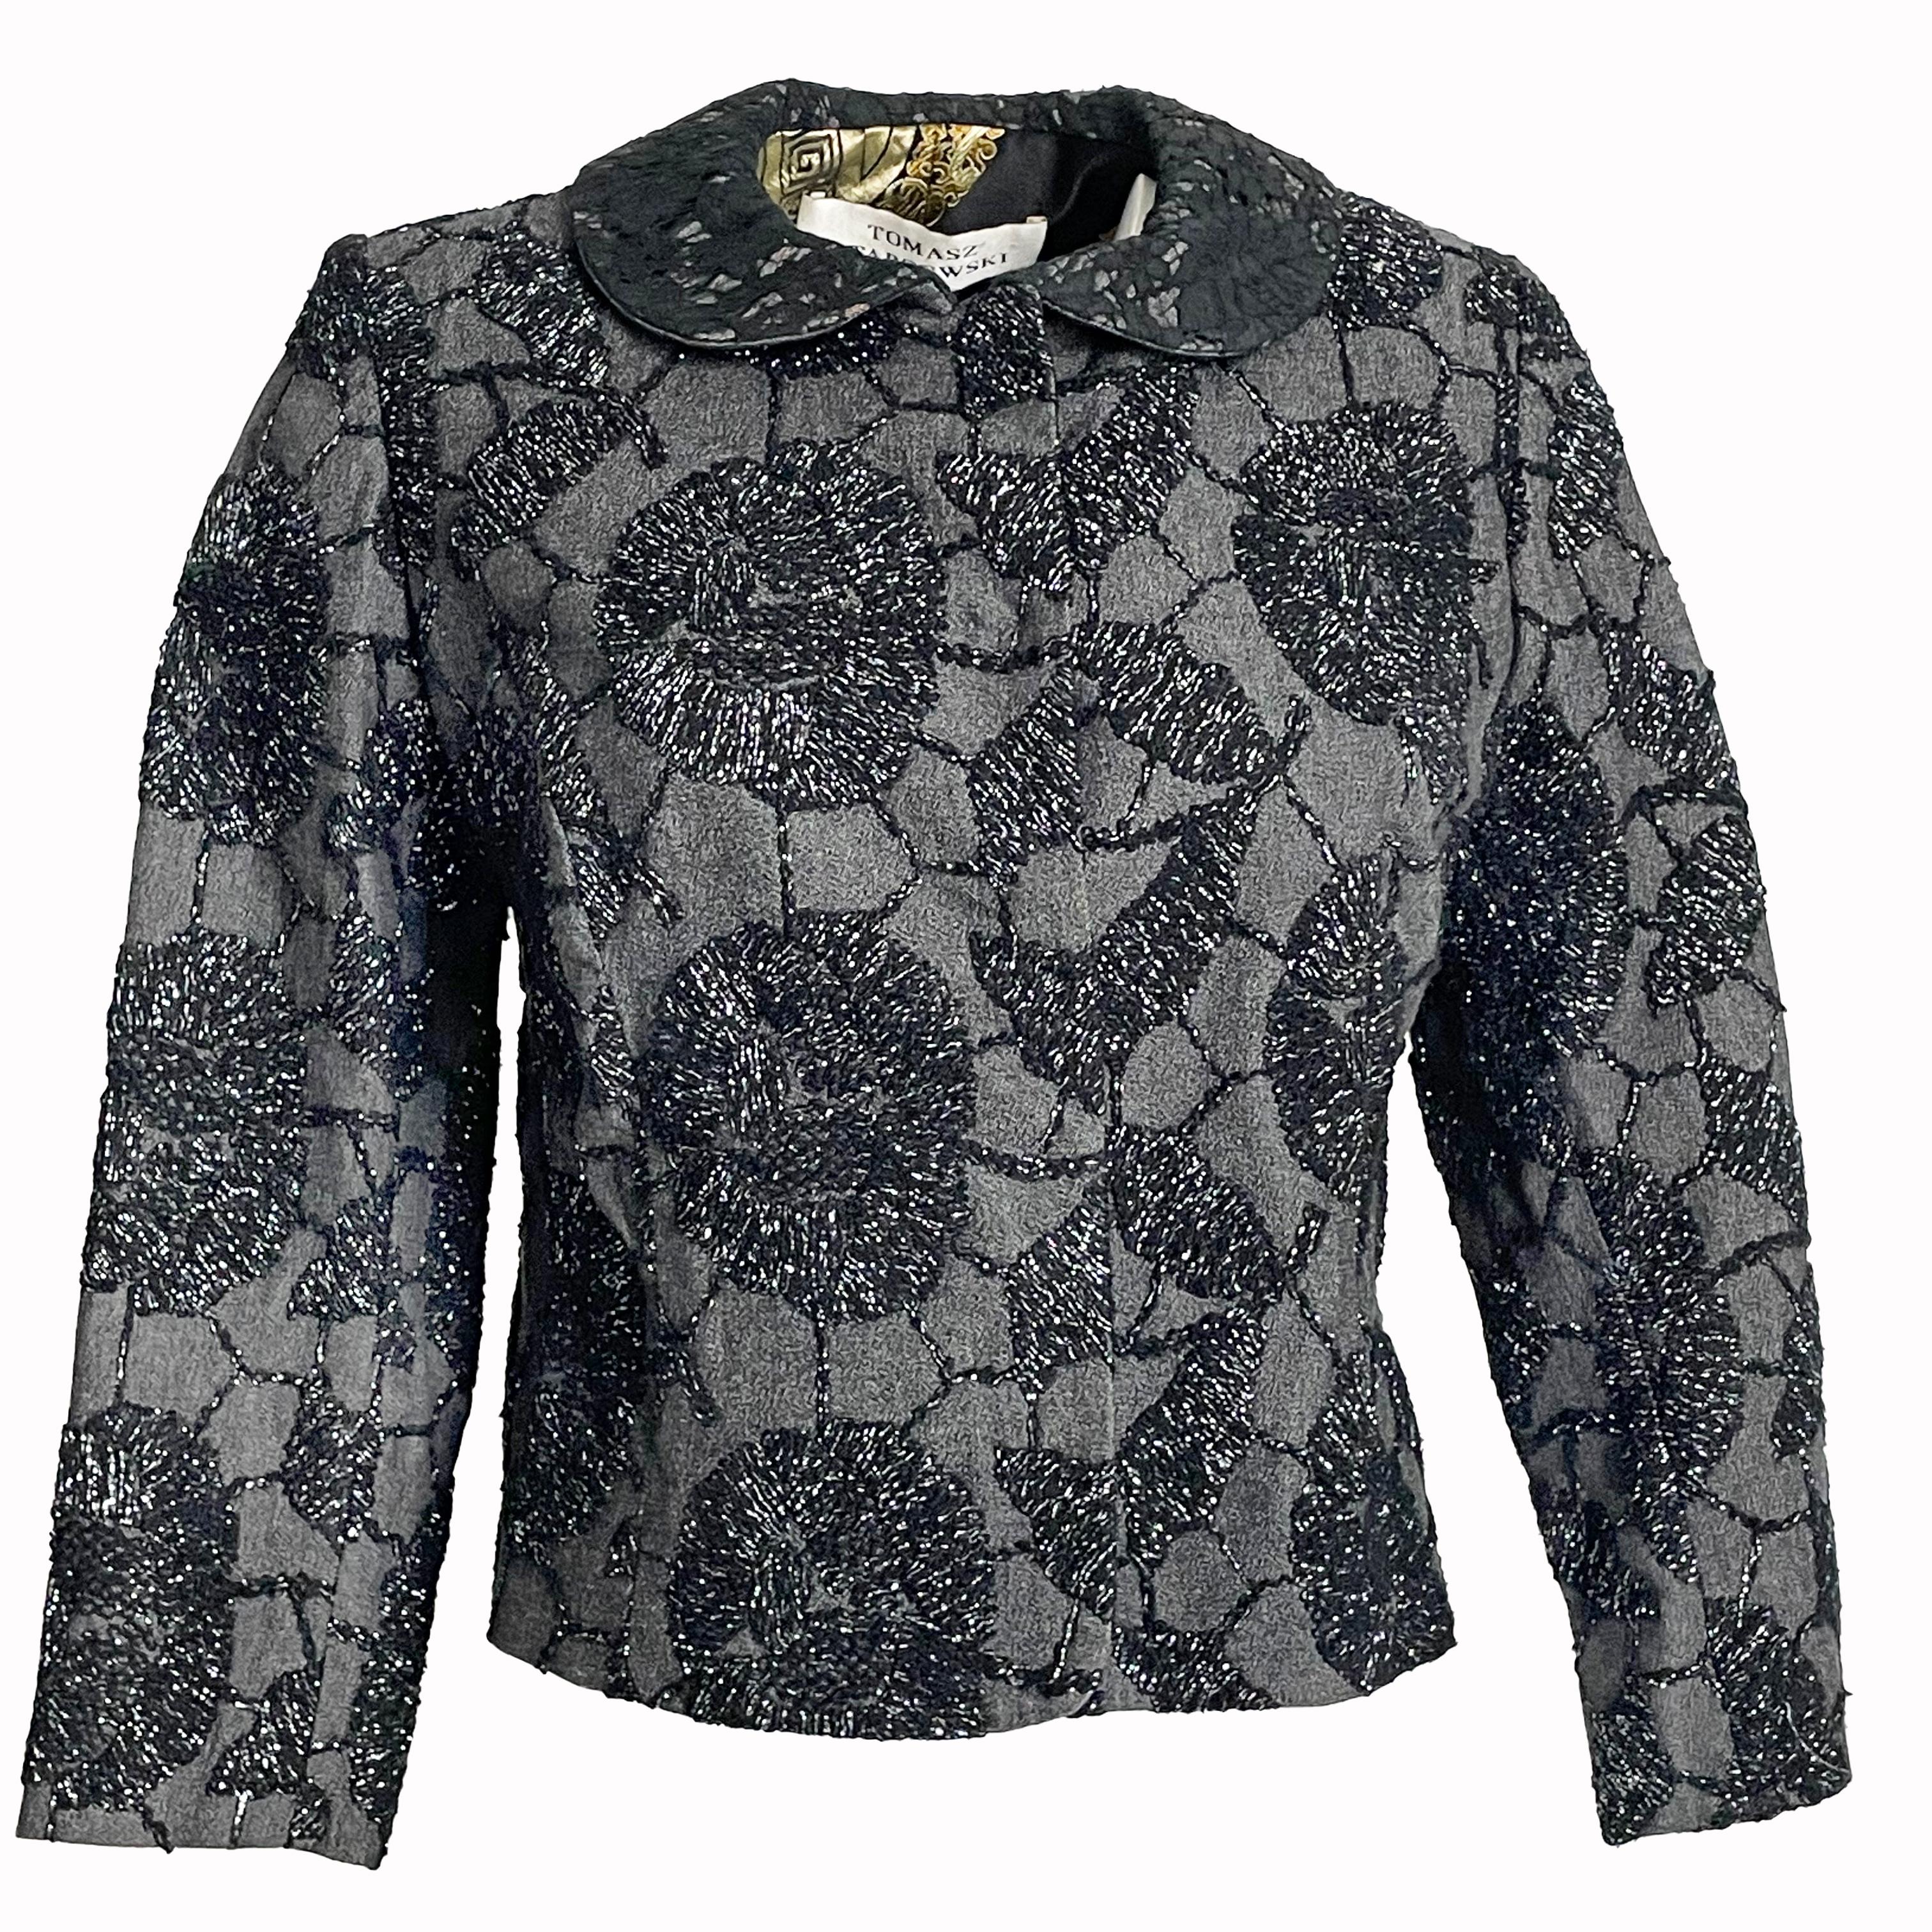 A fabulous and unique cropped jacket by UK designer Tomasz Starzewski, who designed for the late Diana, Princess of Wales amongst other members of the Royal Family. 

The jacket exterior features intricate metallic-thread embroidered florals against